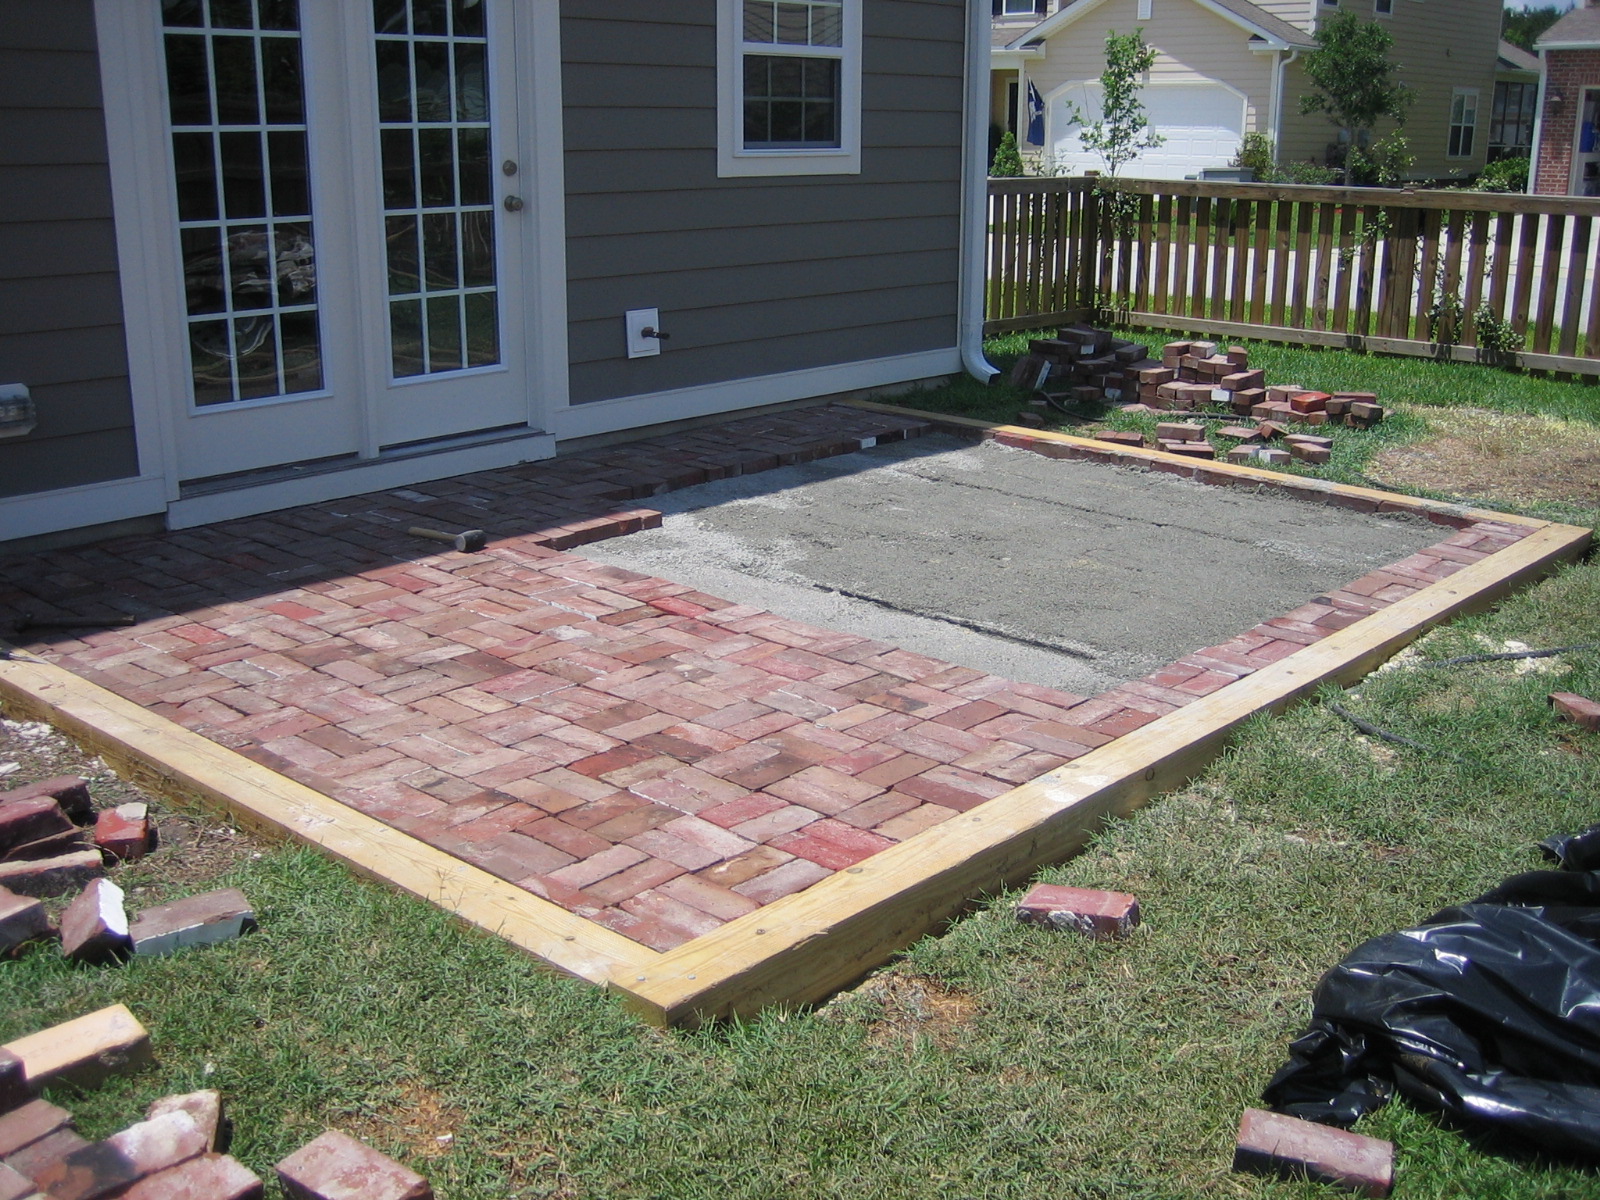 The Lowcountry Lady: Goodbye concrete, hello reclaimed brick patio!